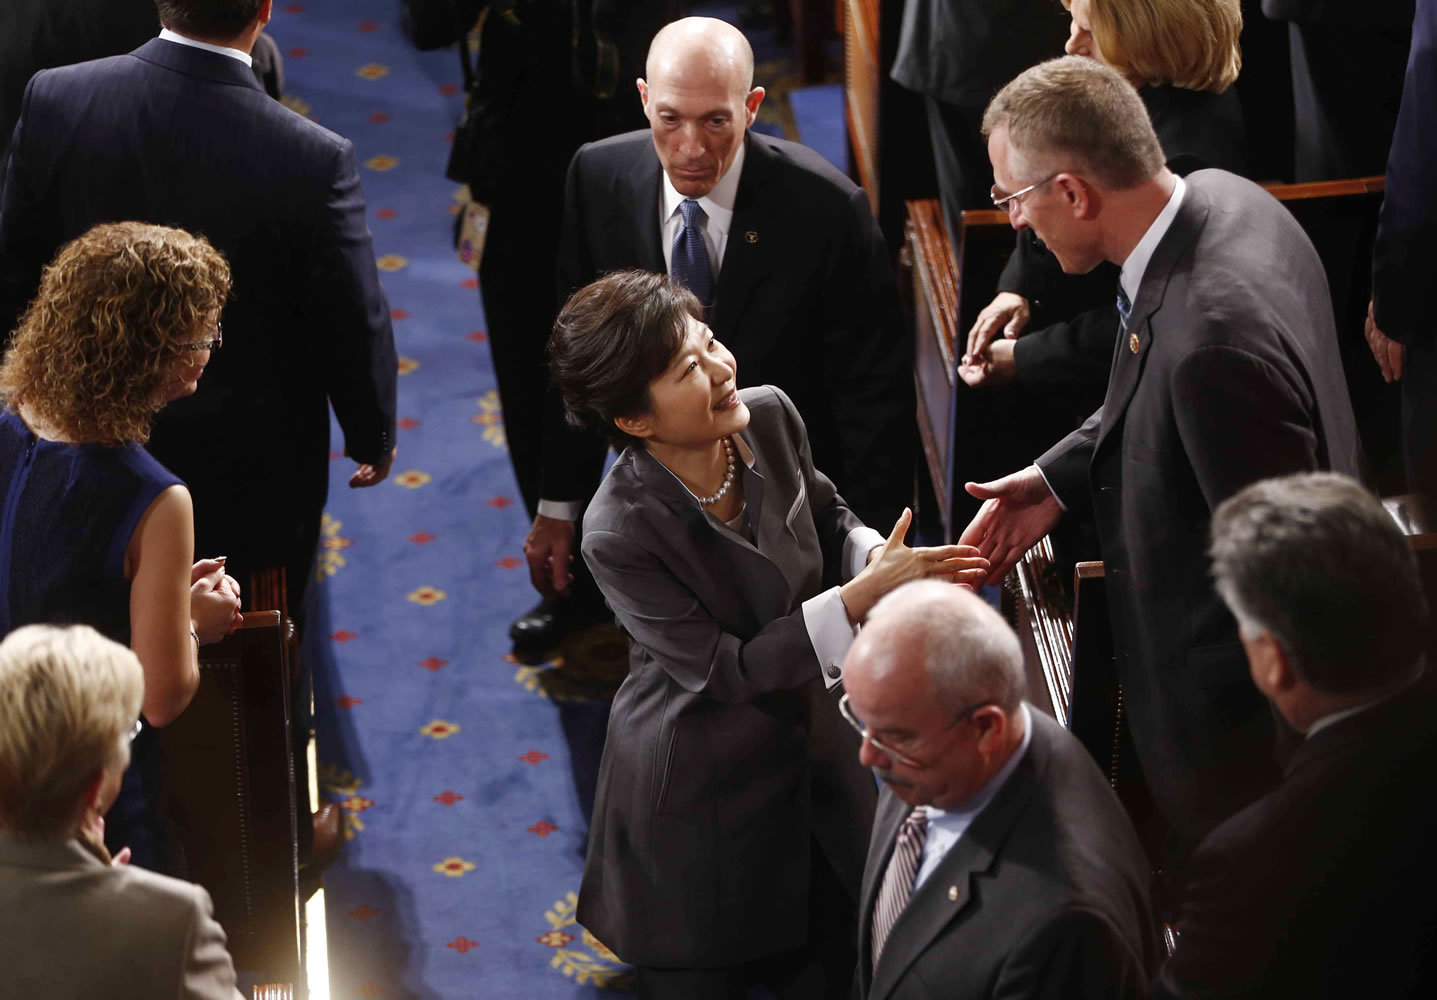 South Korea's President Park Geun-hye greets lawmakers as she leaves the chamber after she addressed a joint session of Congress on Capitol Hill in Washington on Wednesday.